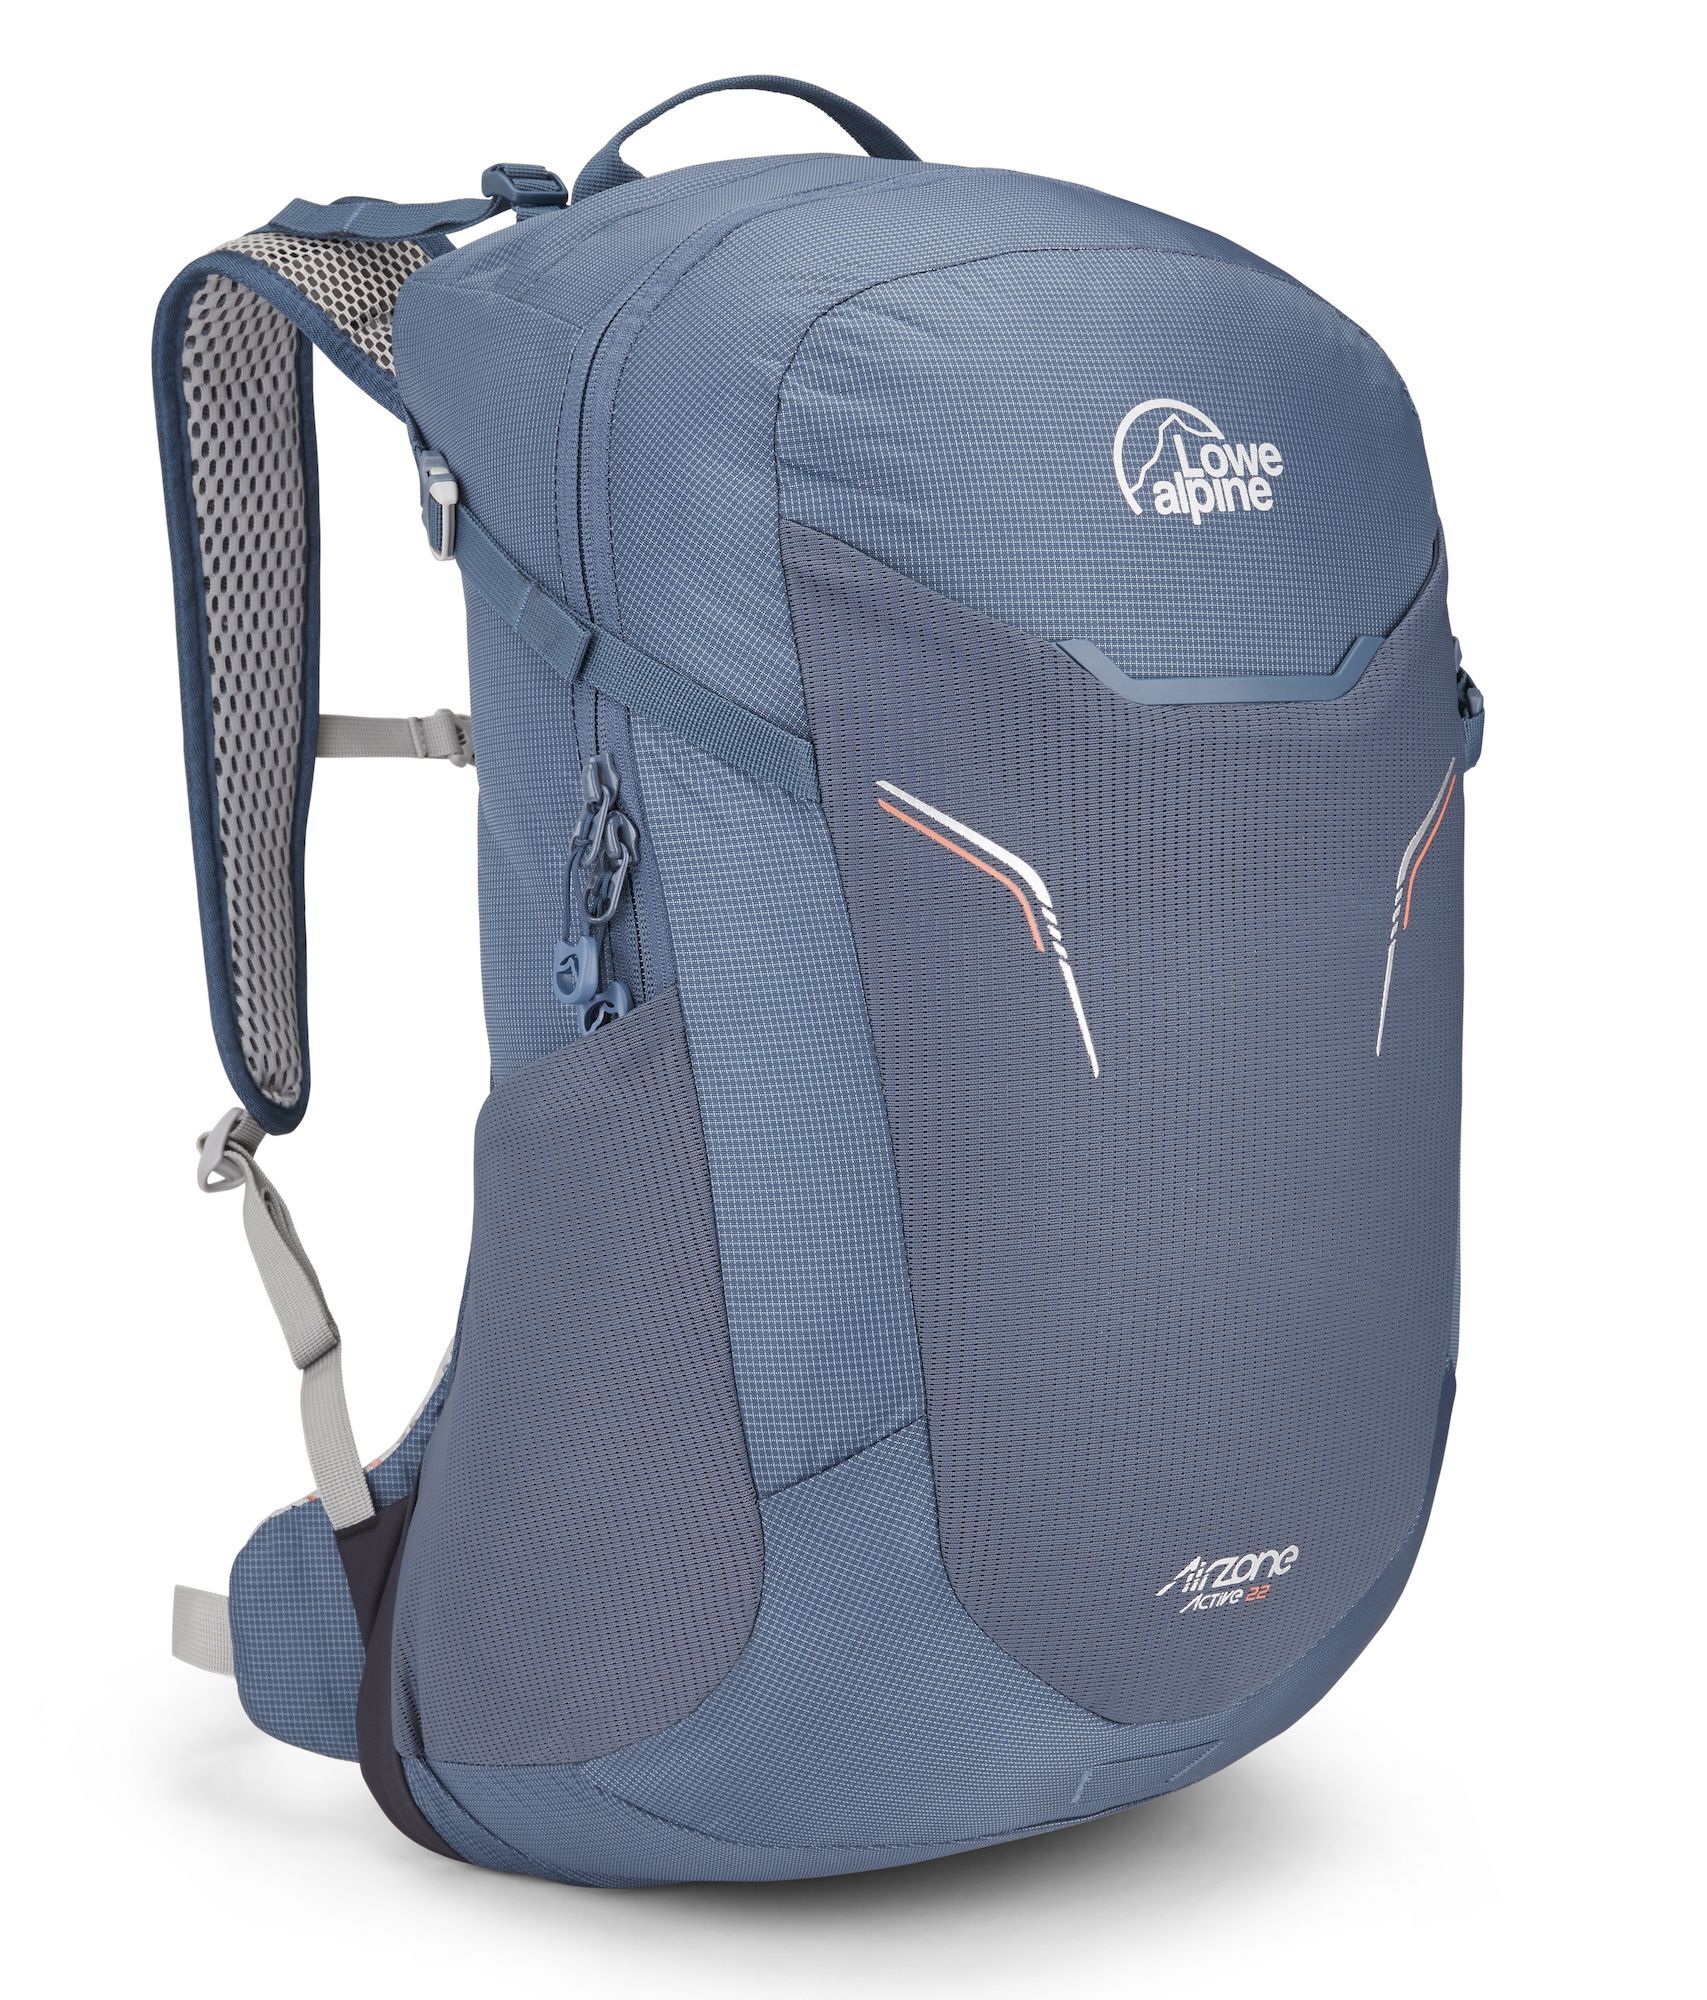 Lowe Alpine AirZone Active 22 - Walking backpack